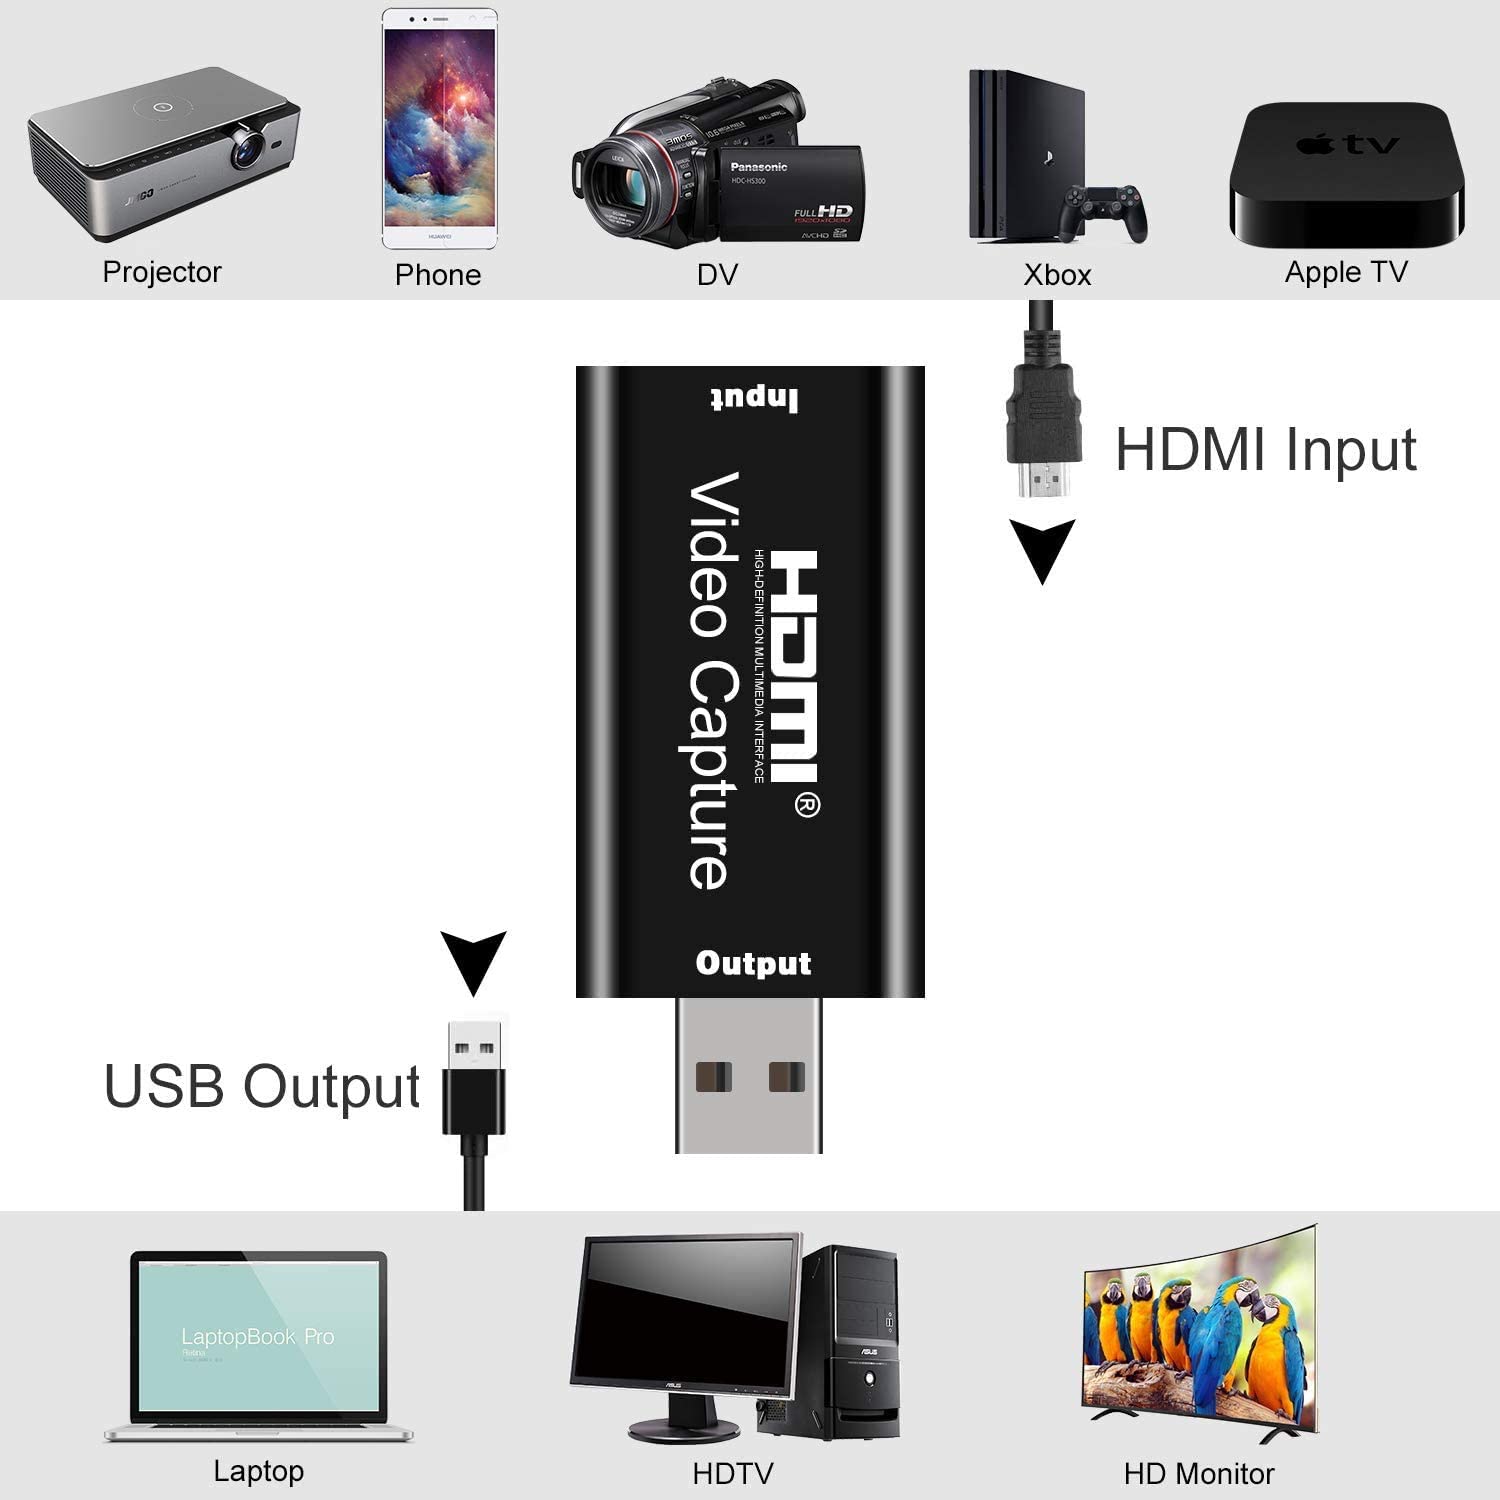 HDMI to USB Game Capture Card,Full HD 1080P Recording Camcorder HDMI USB Audio Video Capture Cards Live Broadcasting or Action Cam to PC or Mac for High Definition Acquisition Easily Connect DSLR 